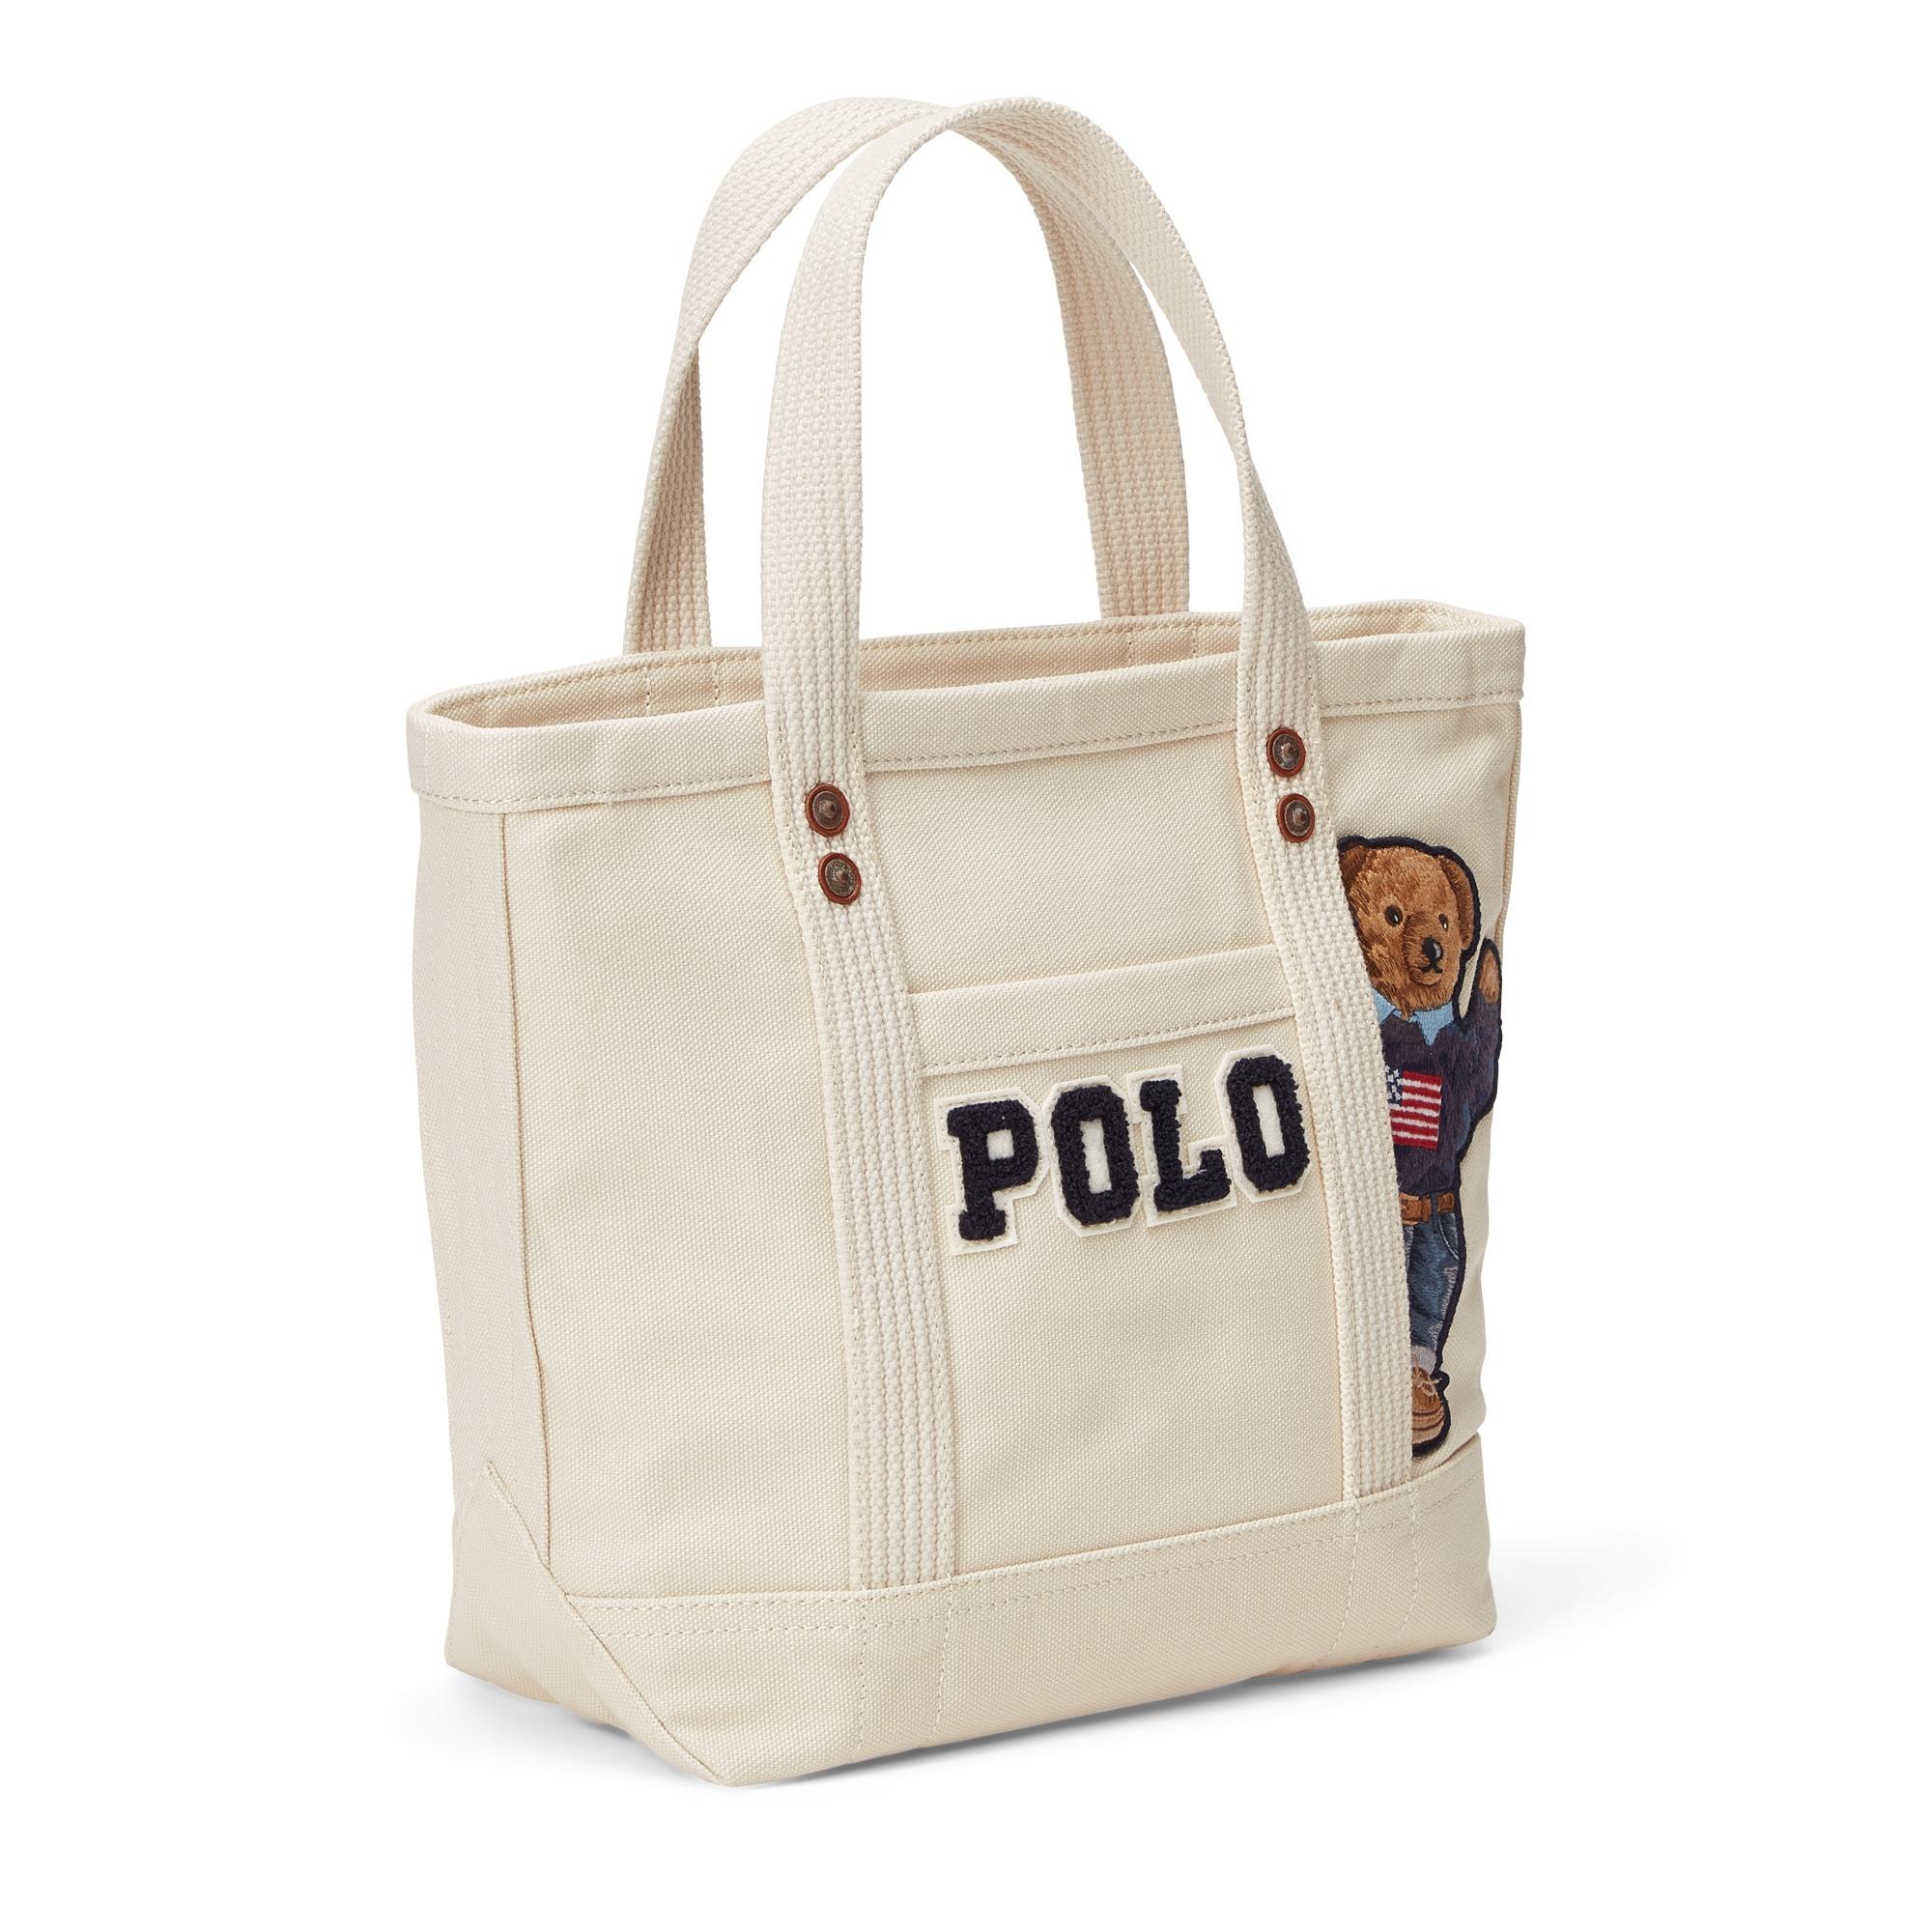 Polo Ralph Lauren Canvas Tote Top Sellers, UP TO 63% OFF | www 